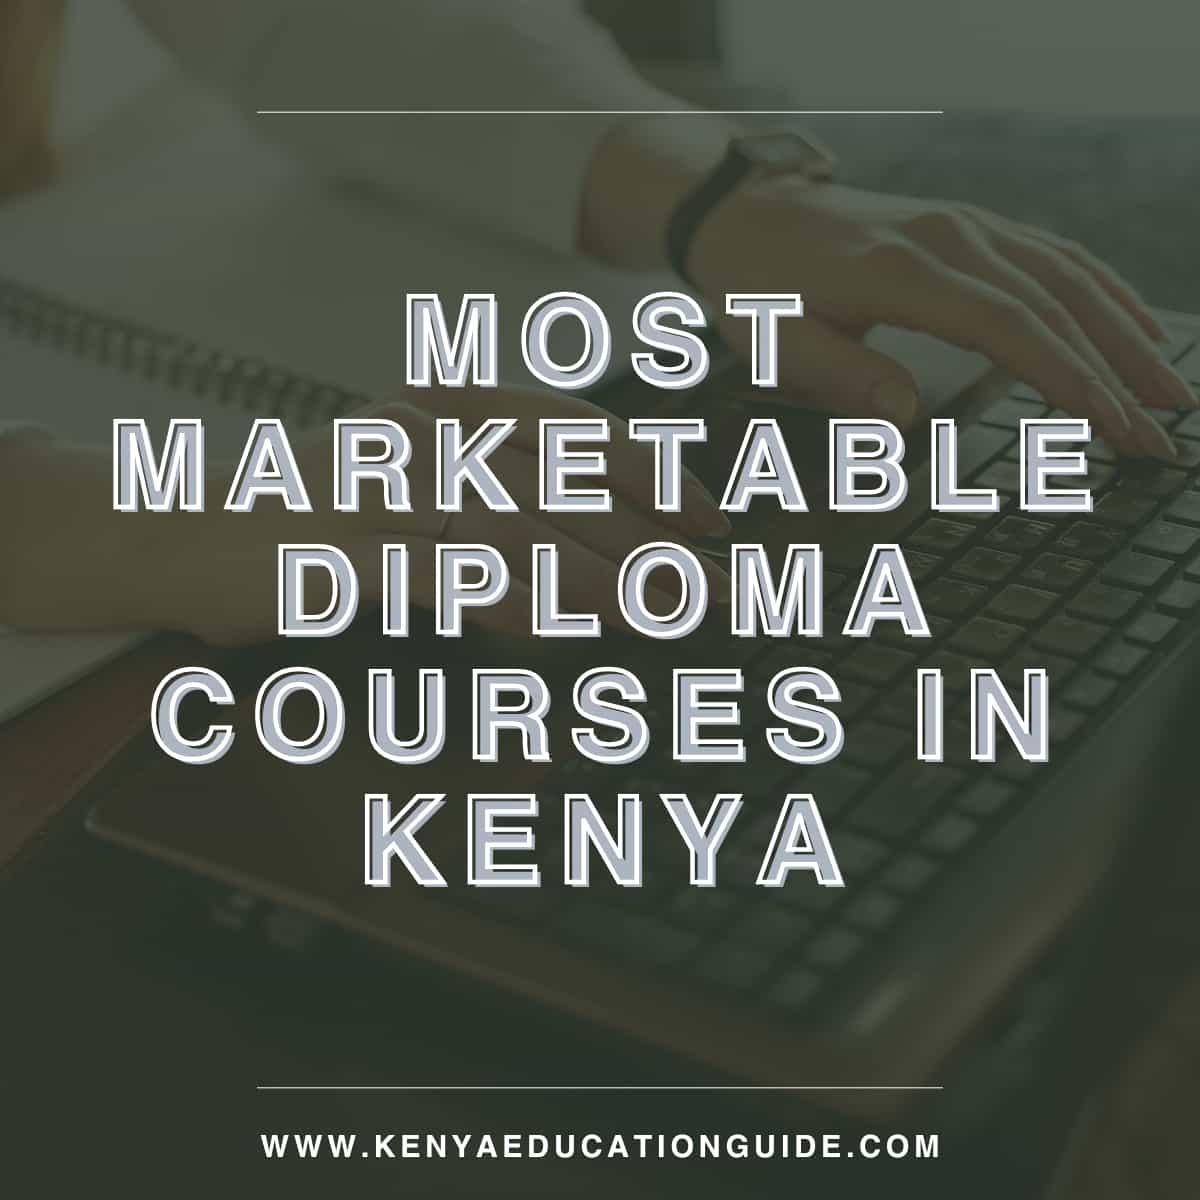 Most Marketable Diploma Courses in Kenya